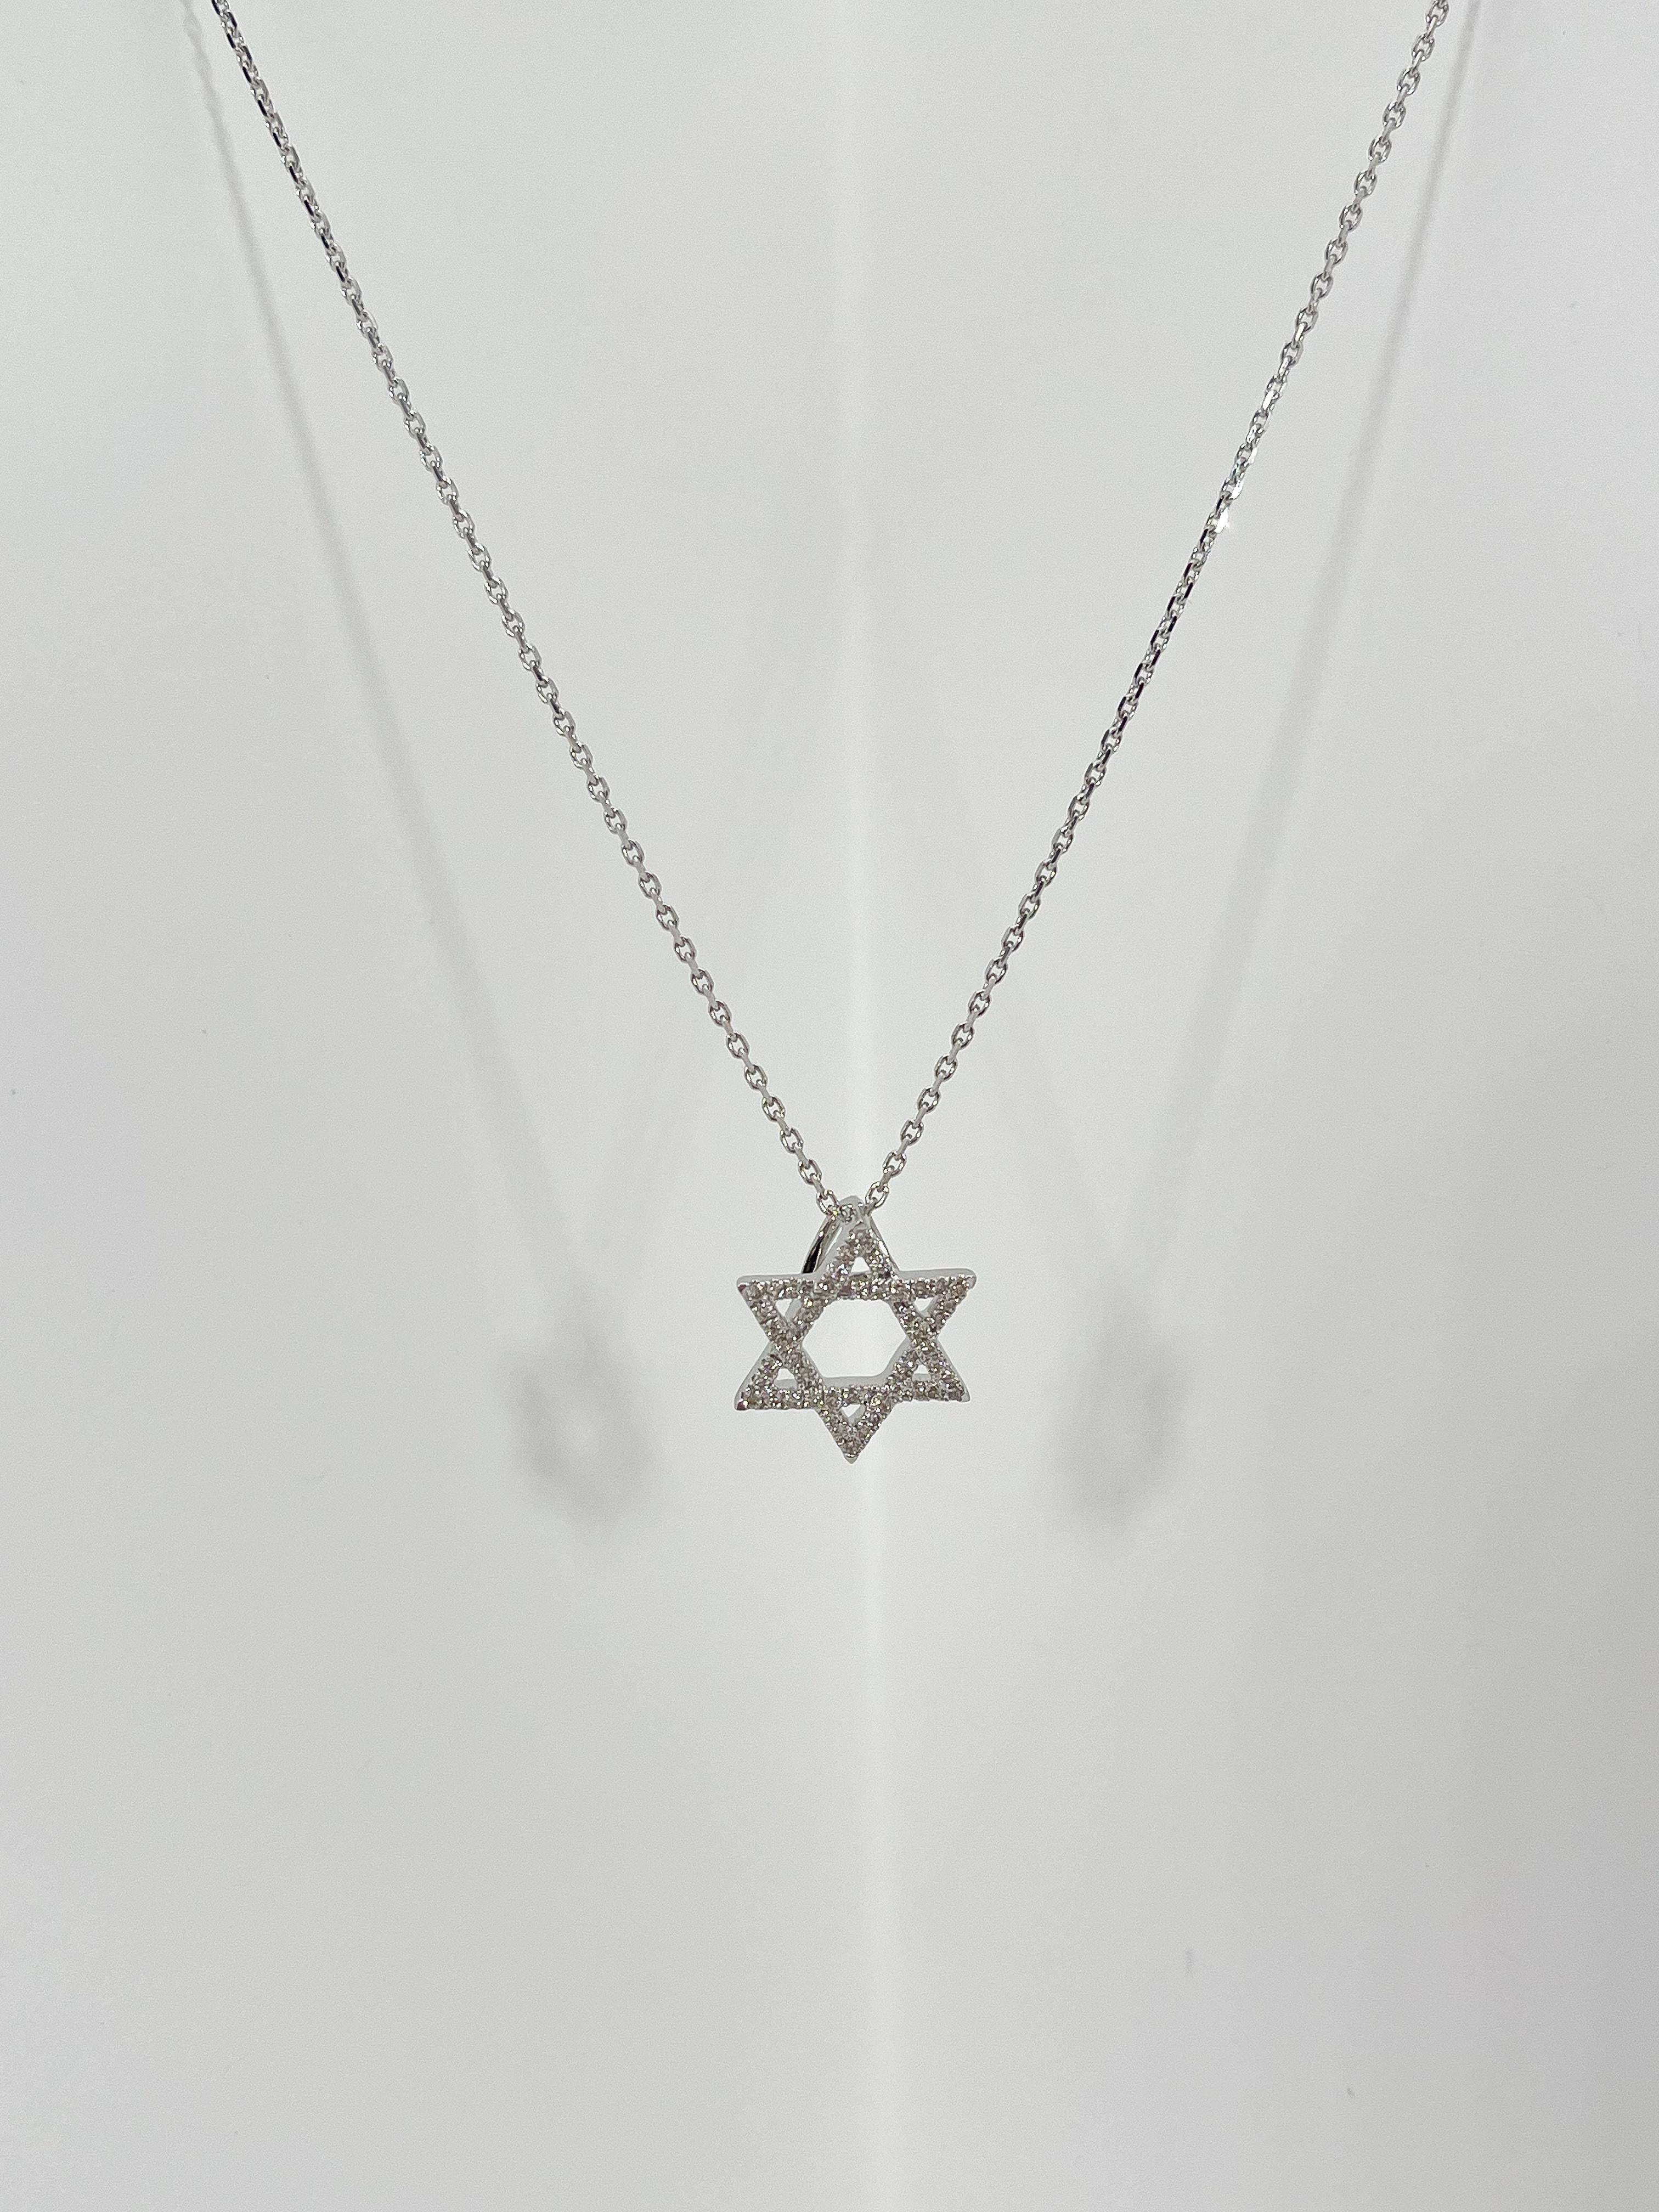 14k white gold .21 CTW diamond Star of David pendant necklace. The diamonds in the pendant are all round, the pendant measures to be 13.5mm x 12mm, has a lobster clasp to open and close, pendant comes on an 18 inch diamond cut cable chain, and has a